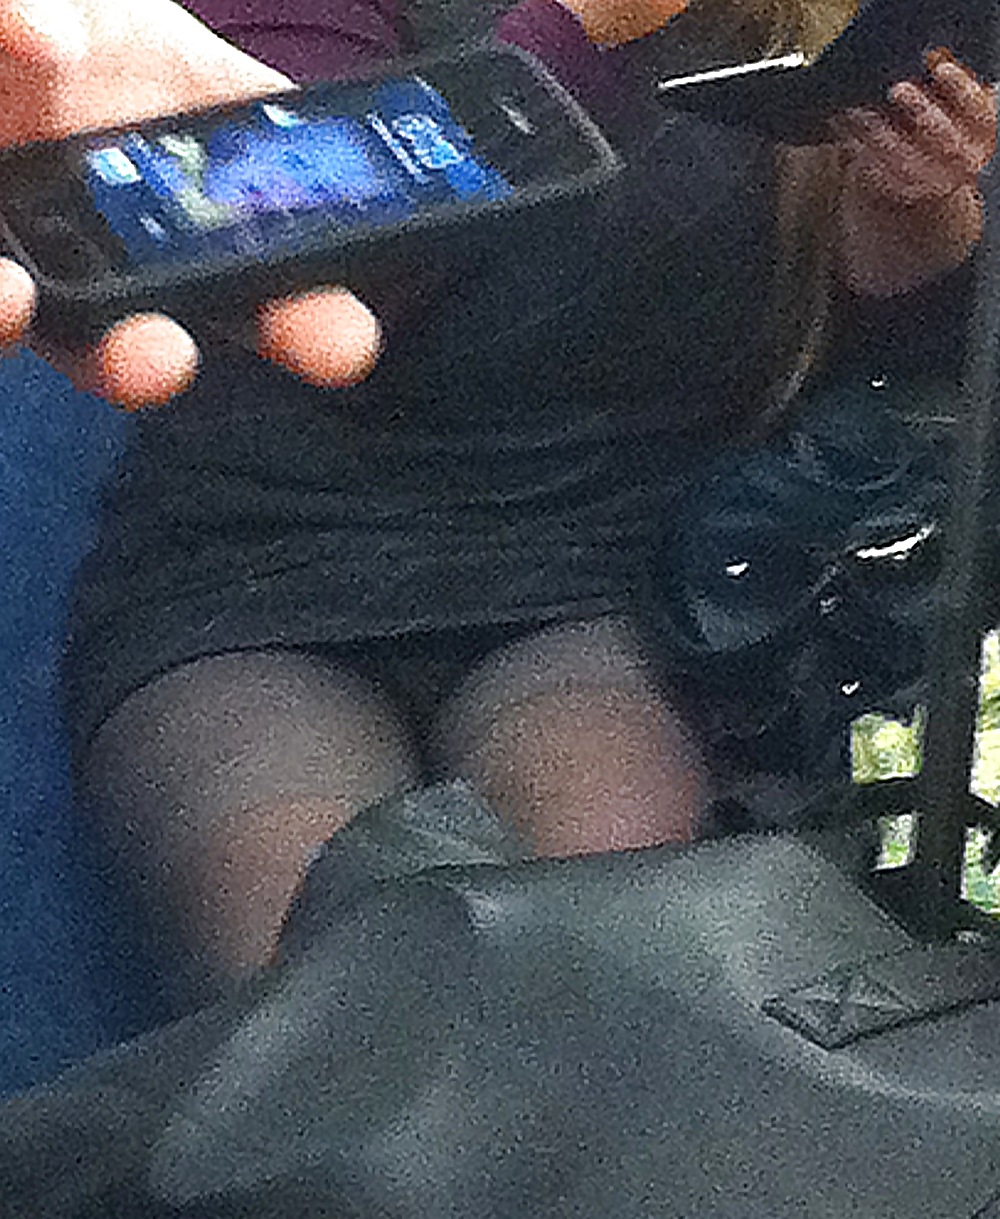 Some chick on the train